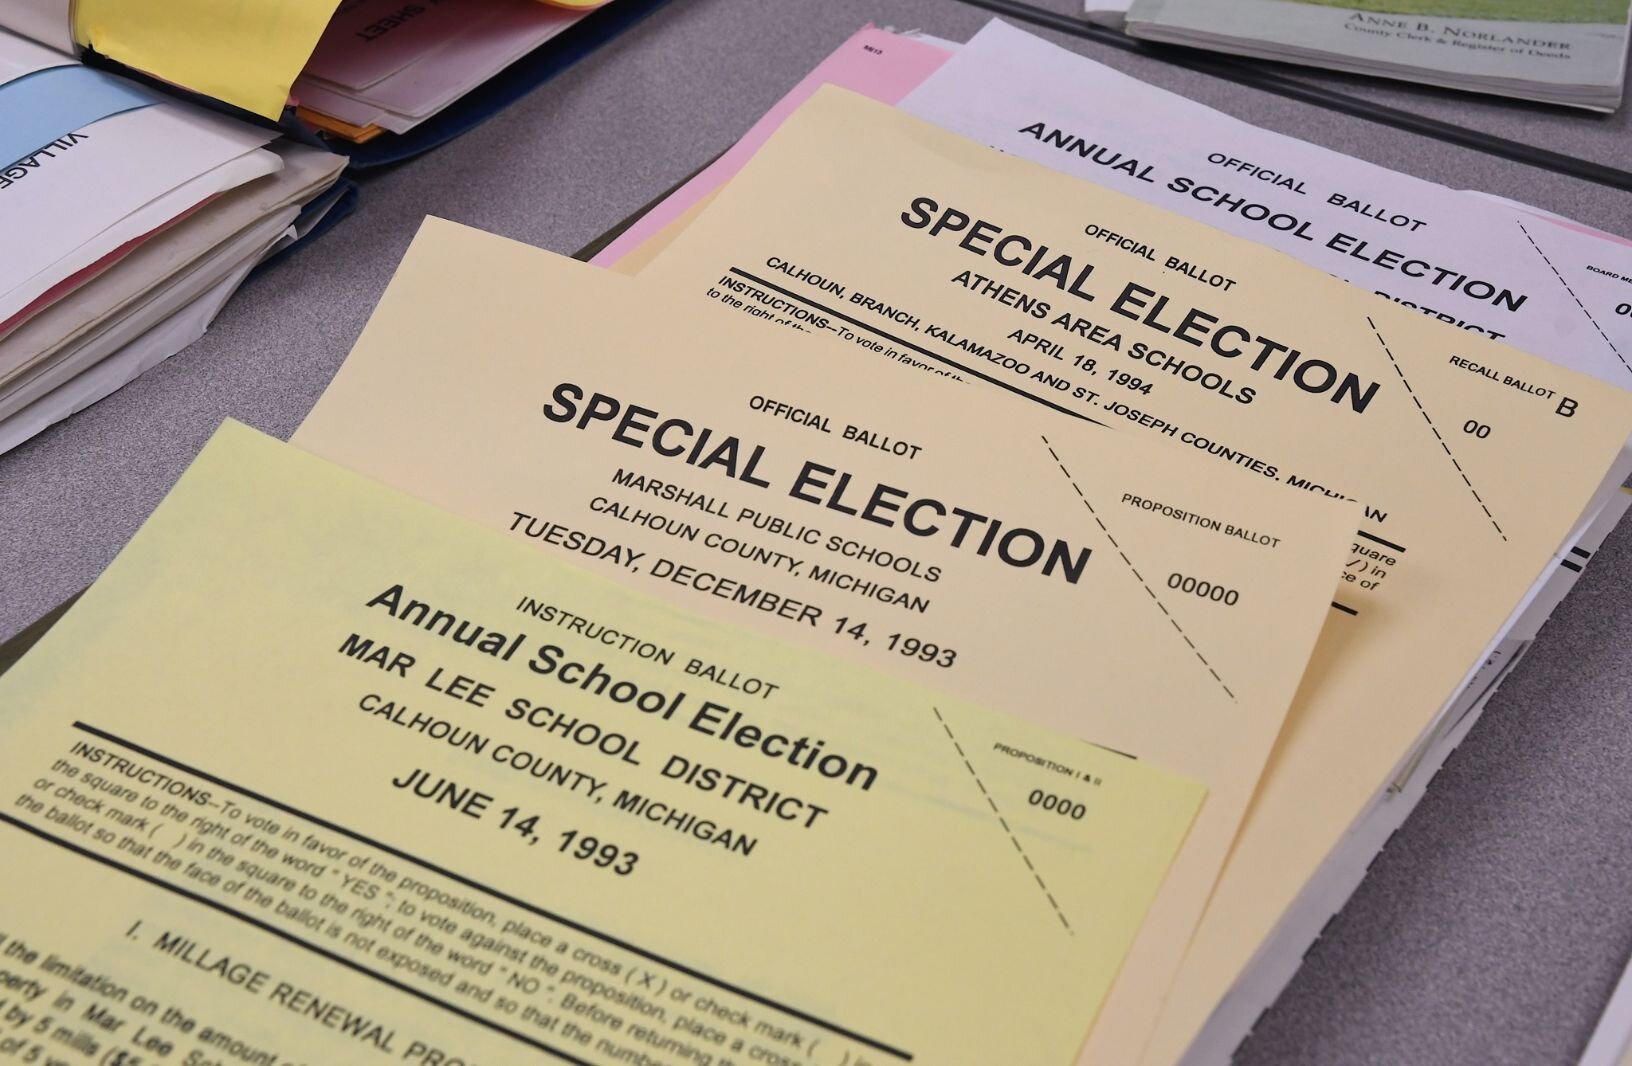 Ballots from school elections for several years